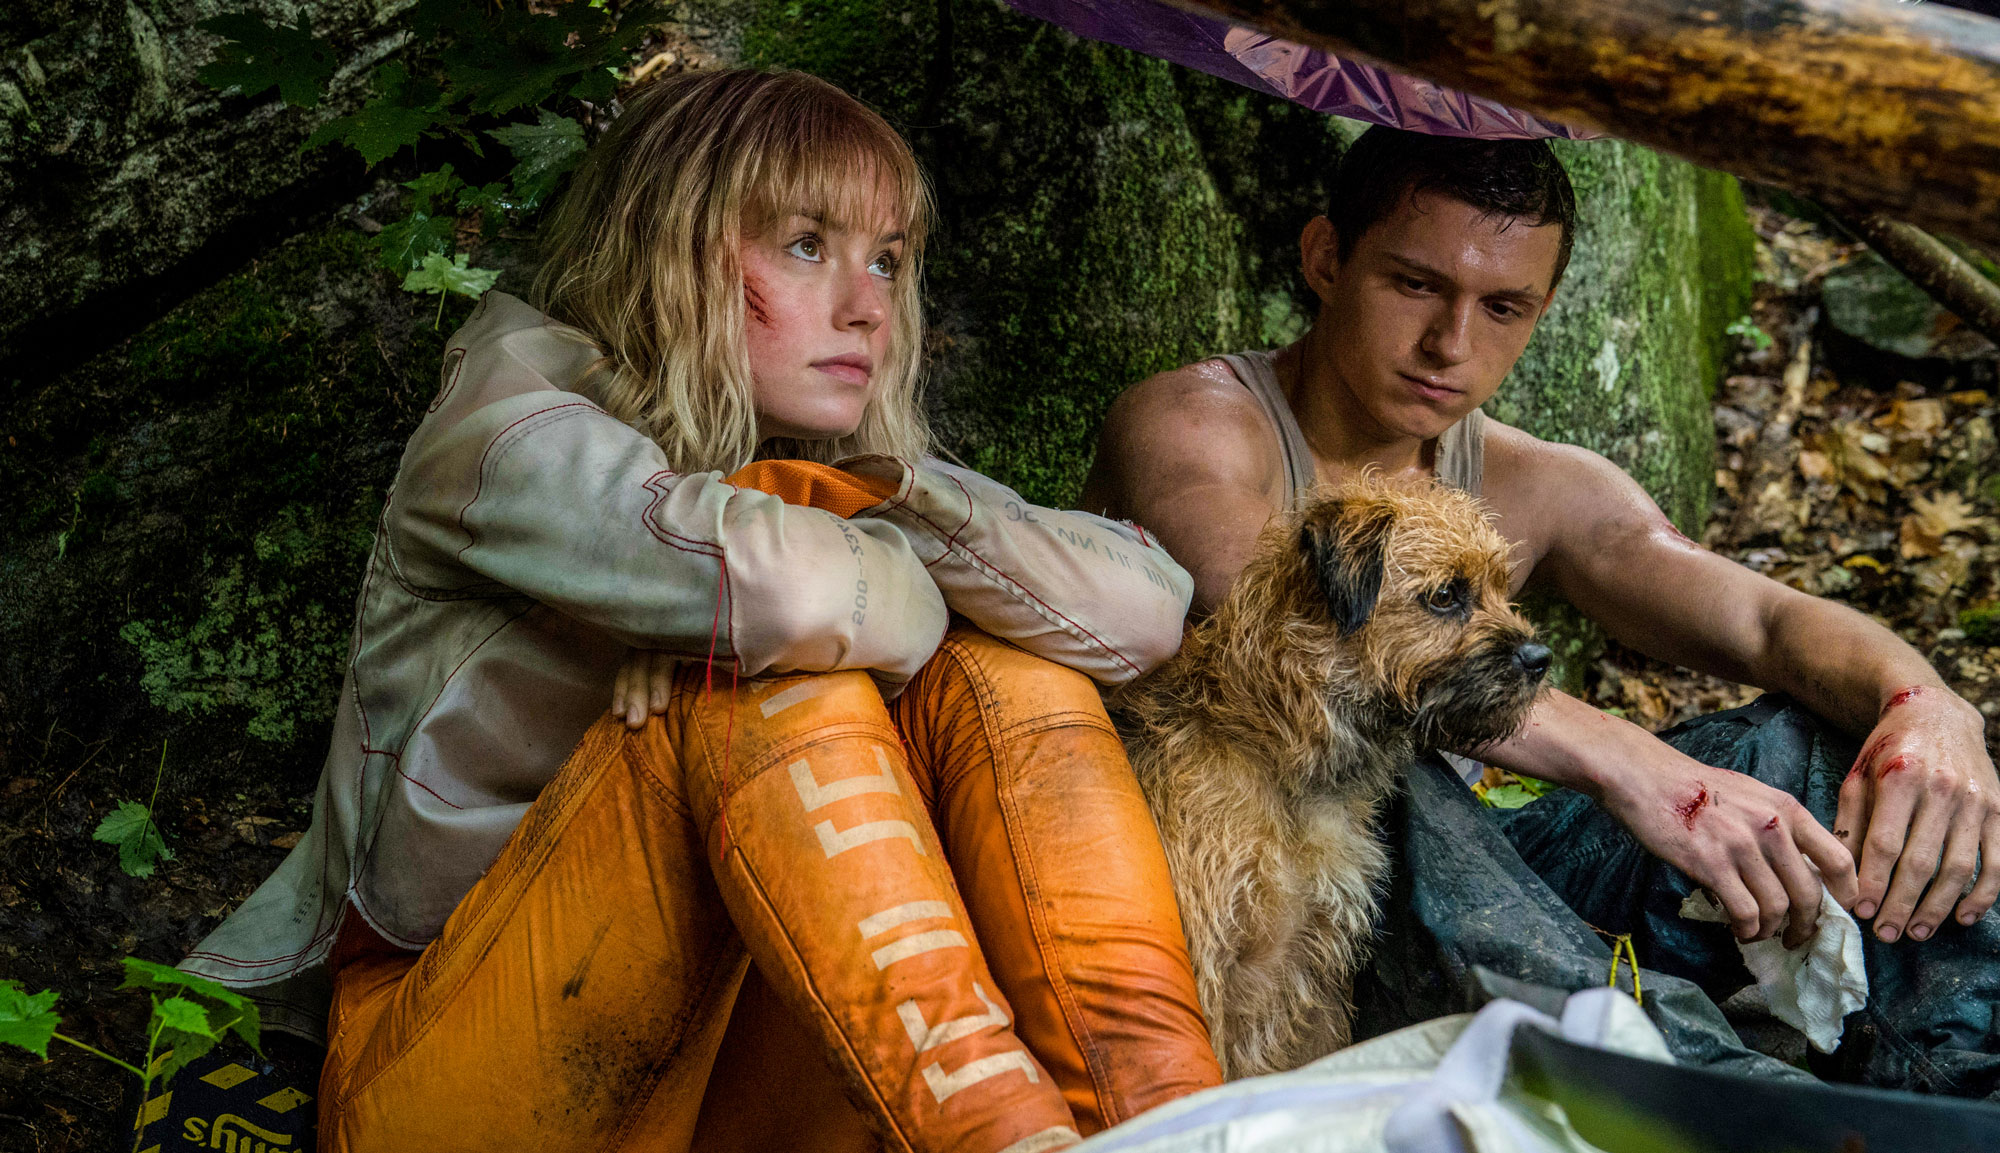 Tom Holland and Daisy Ridley in "Chaos Walking"